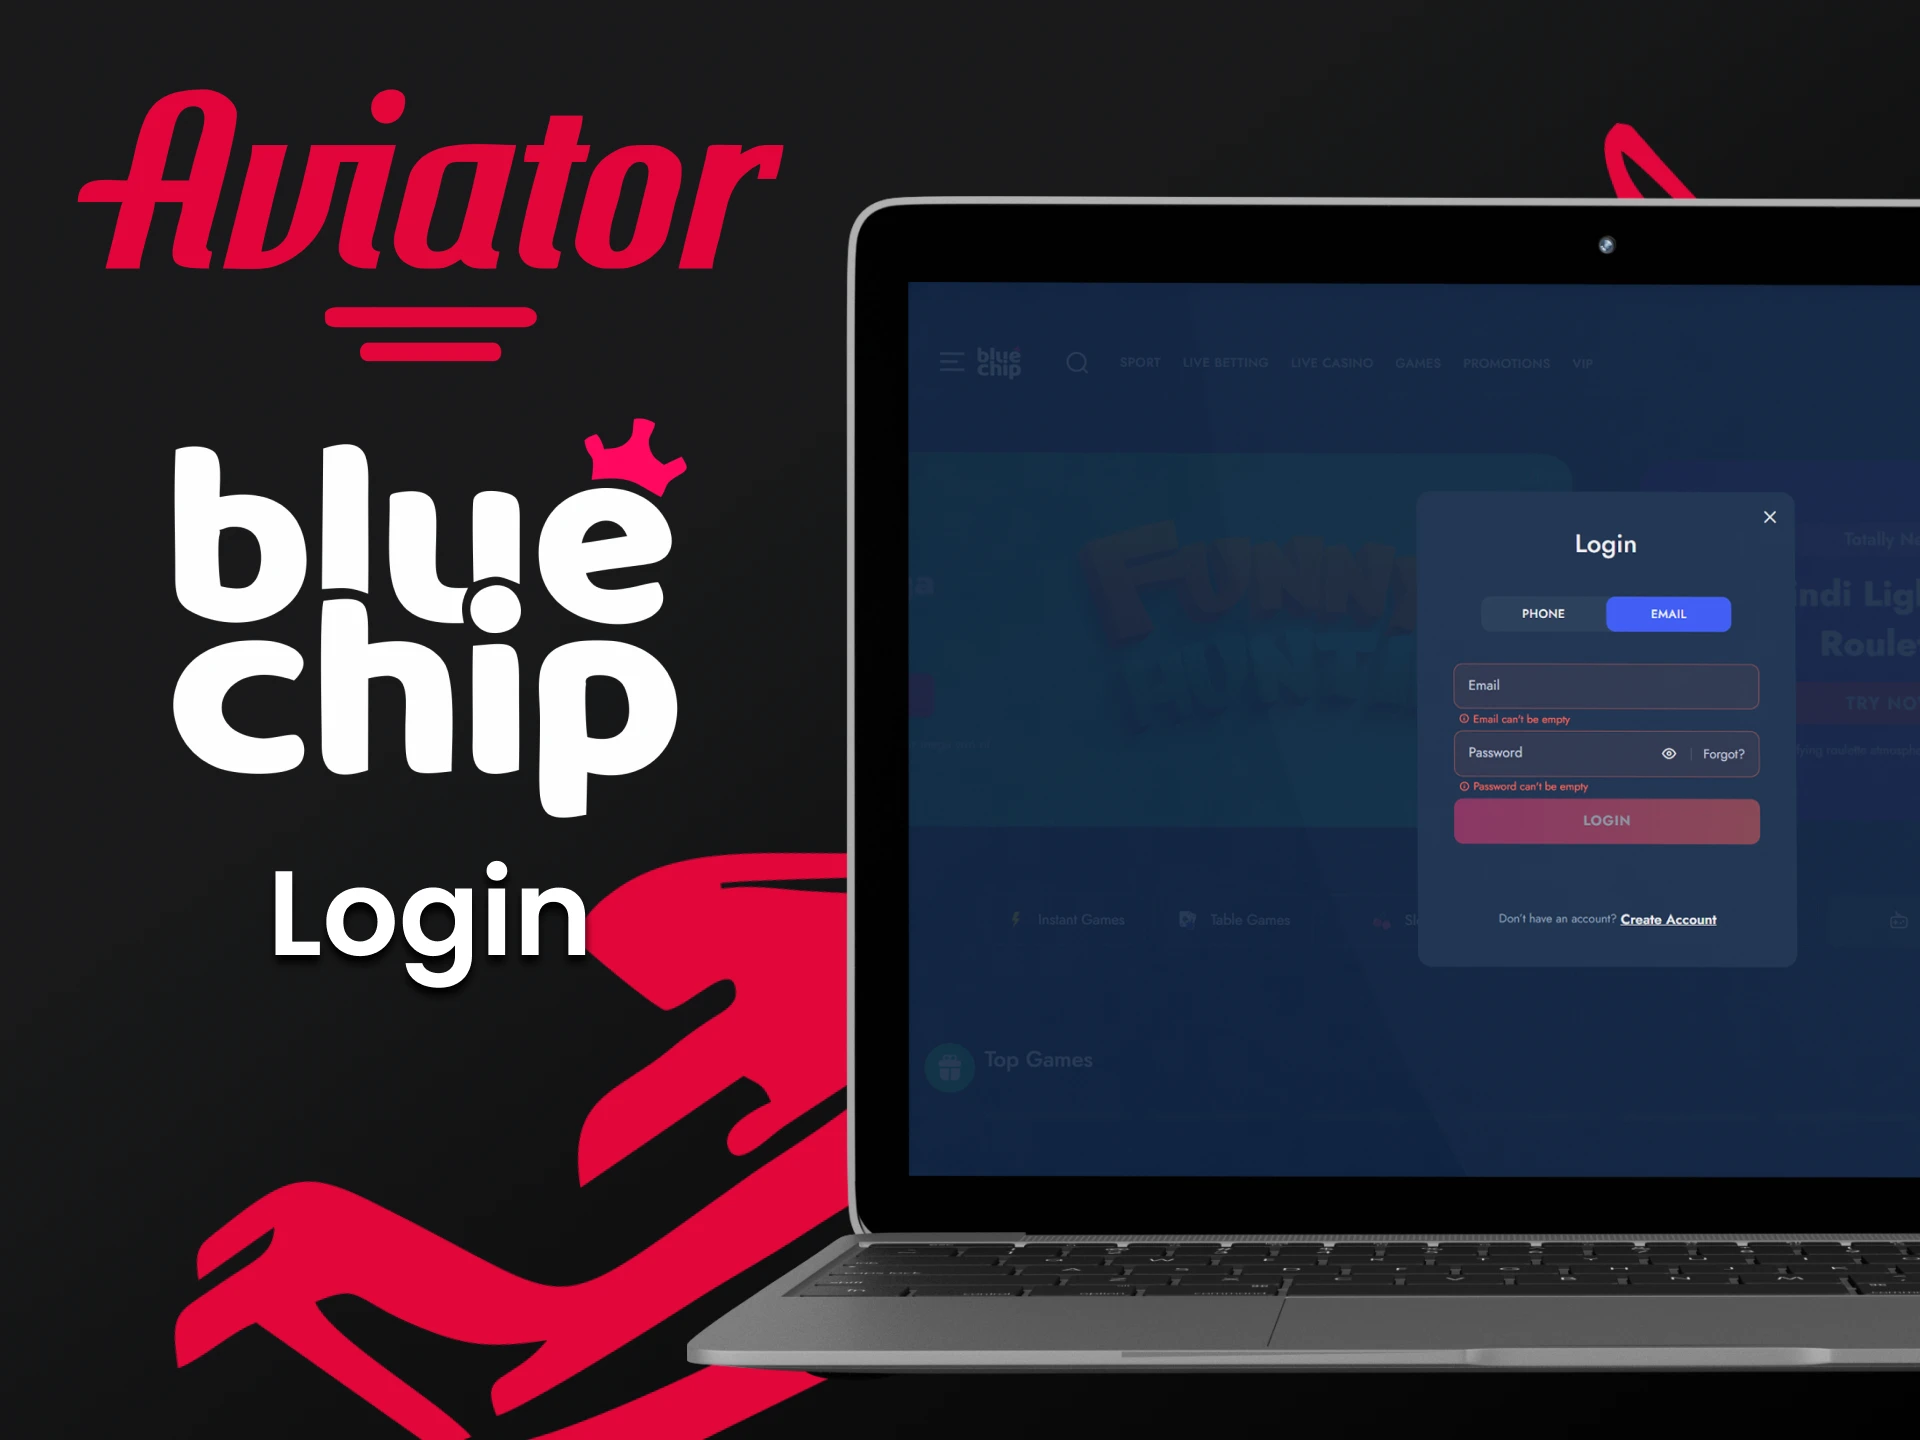 Use your account to play Aviator by Bluechip.